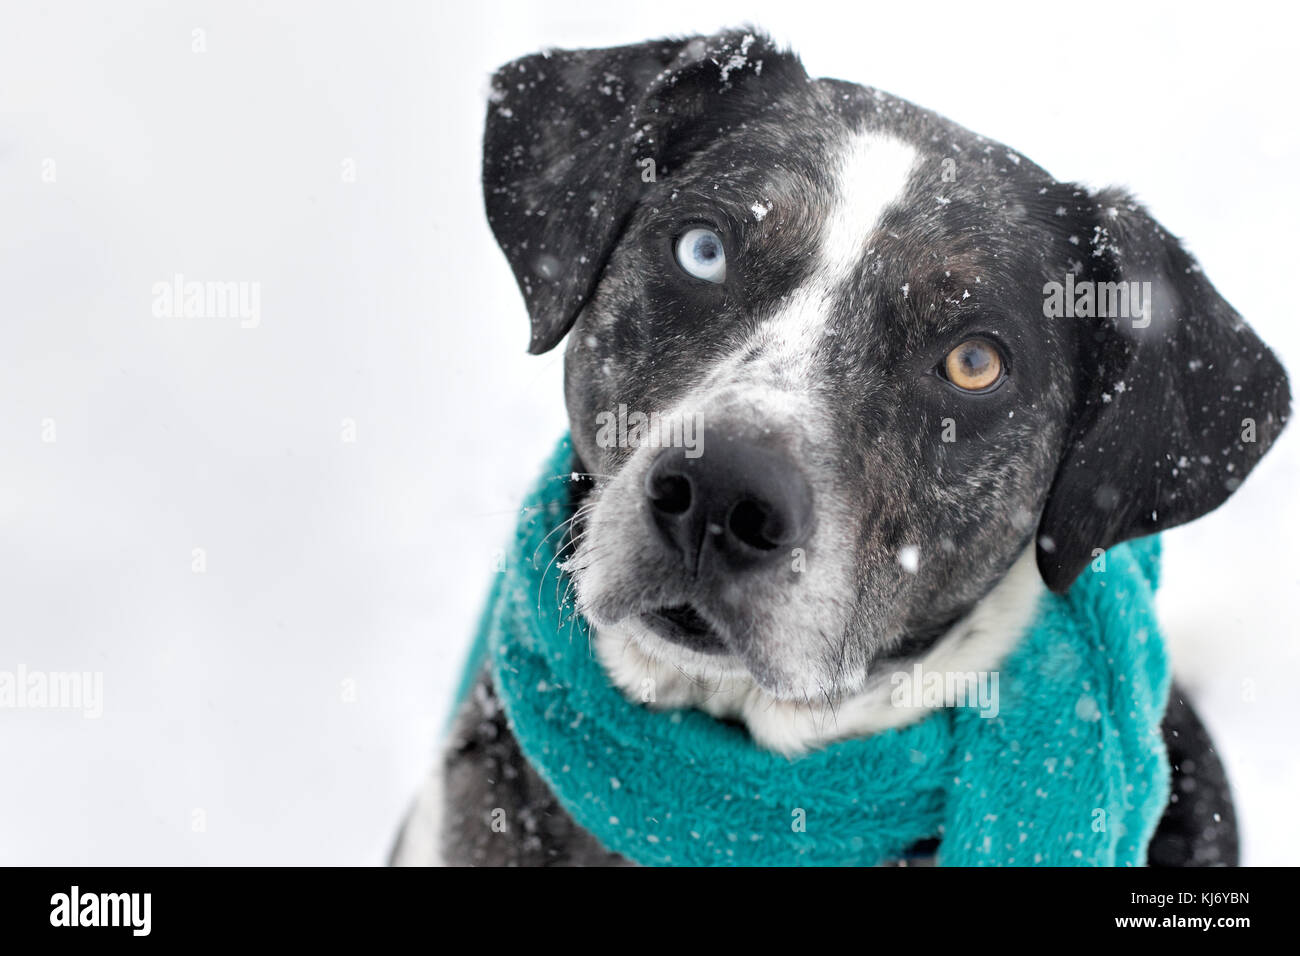 A black and white dog with two different colored eyes wearing a scarf in a snow storm Stock Photo